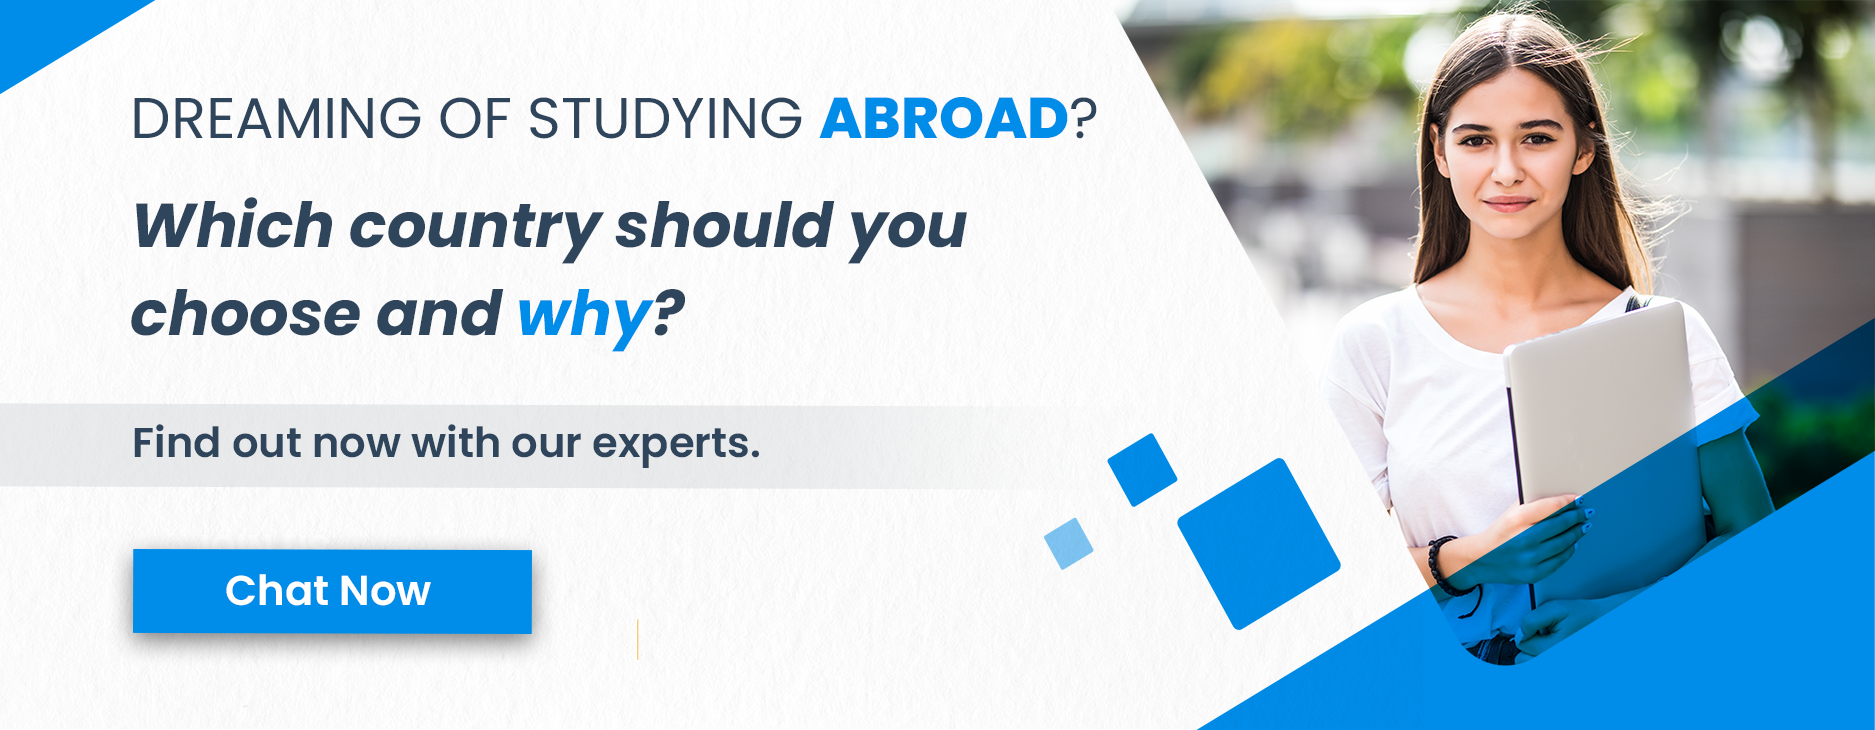 CHoose the right country to study abroad